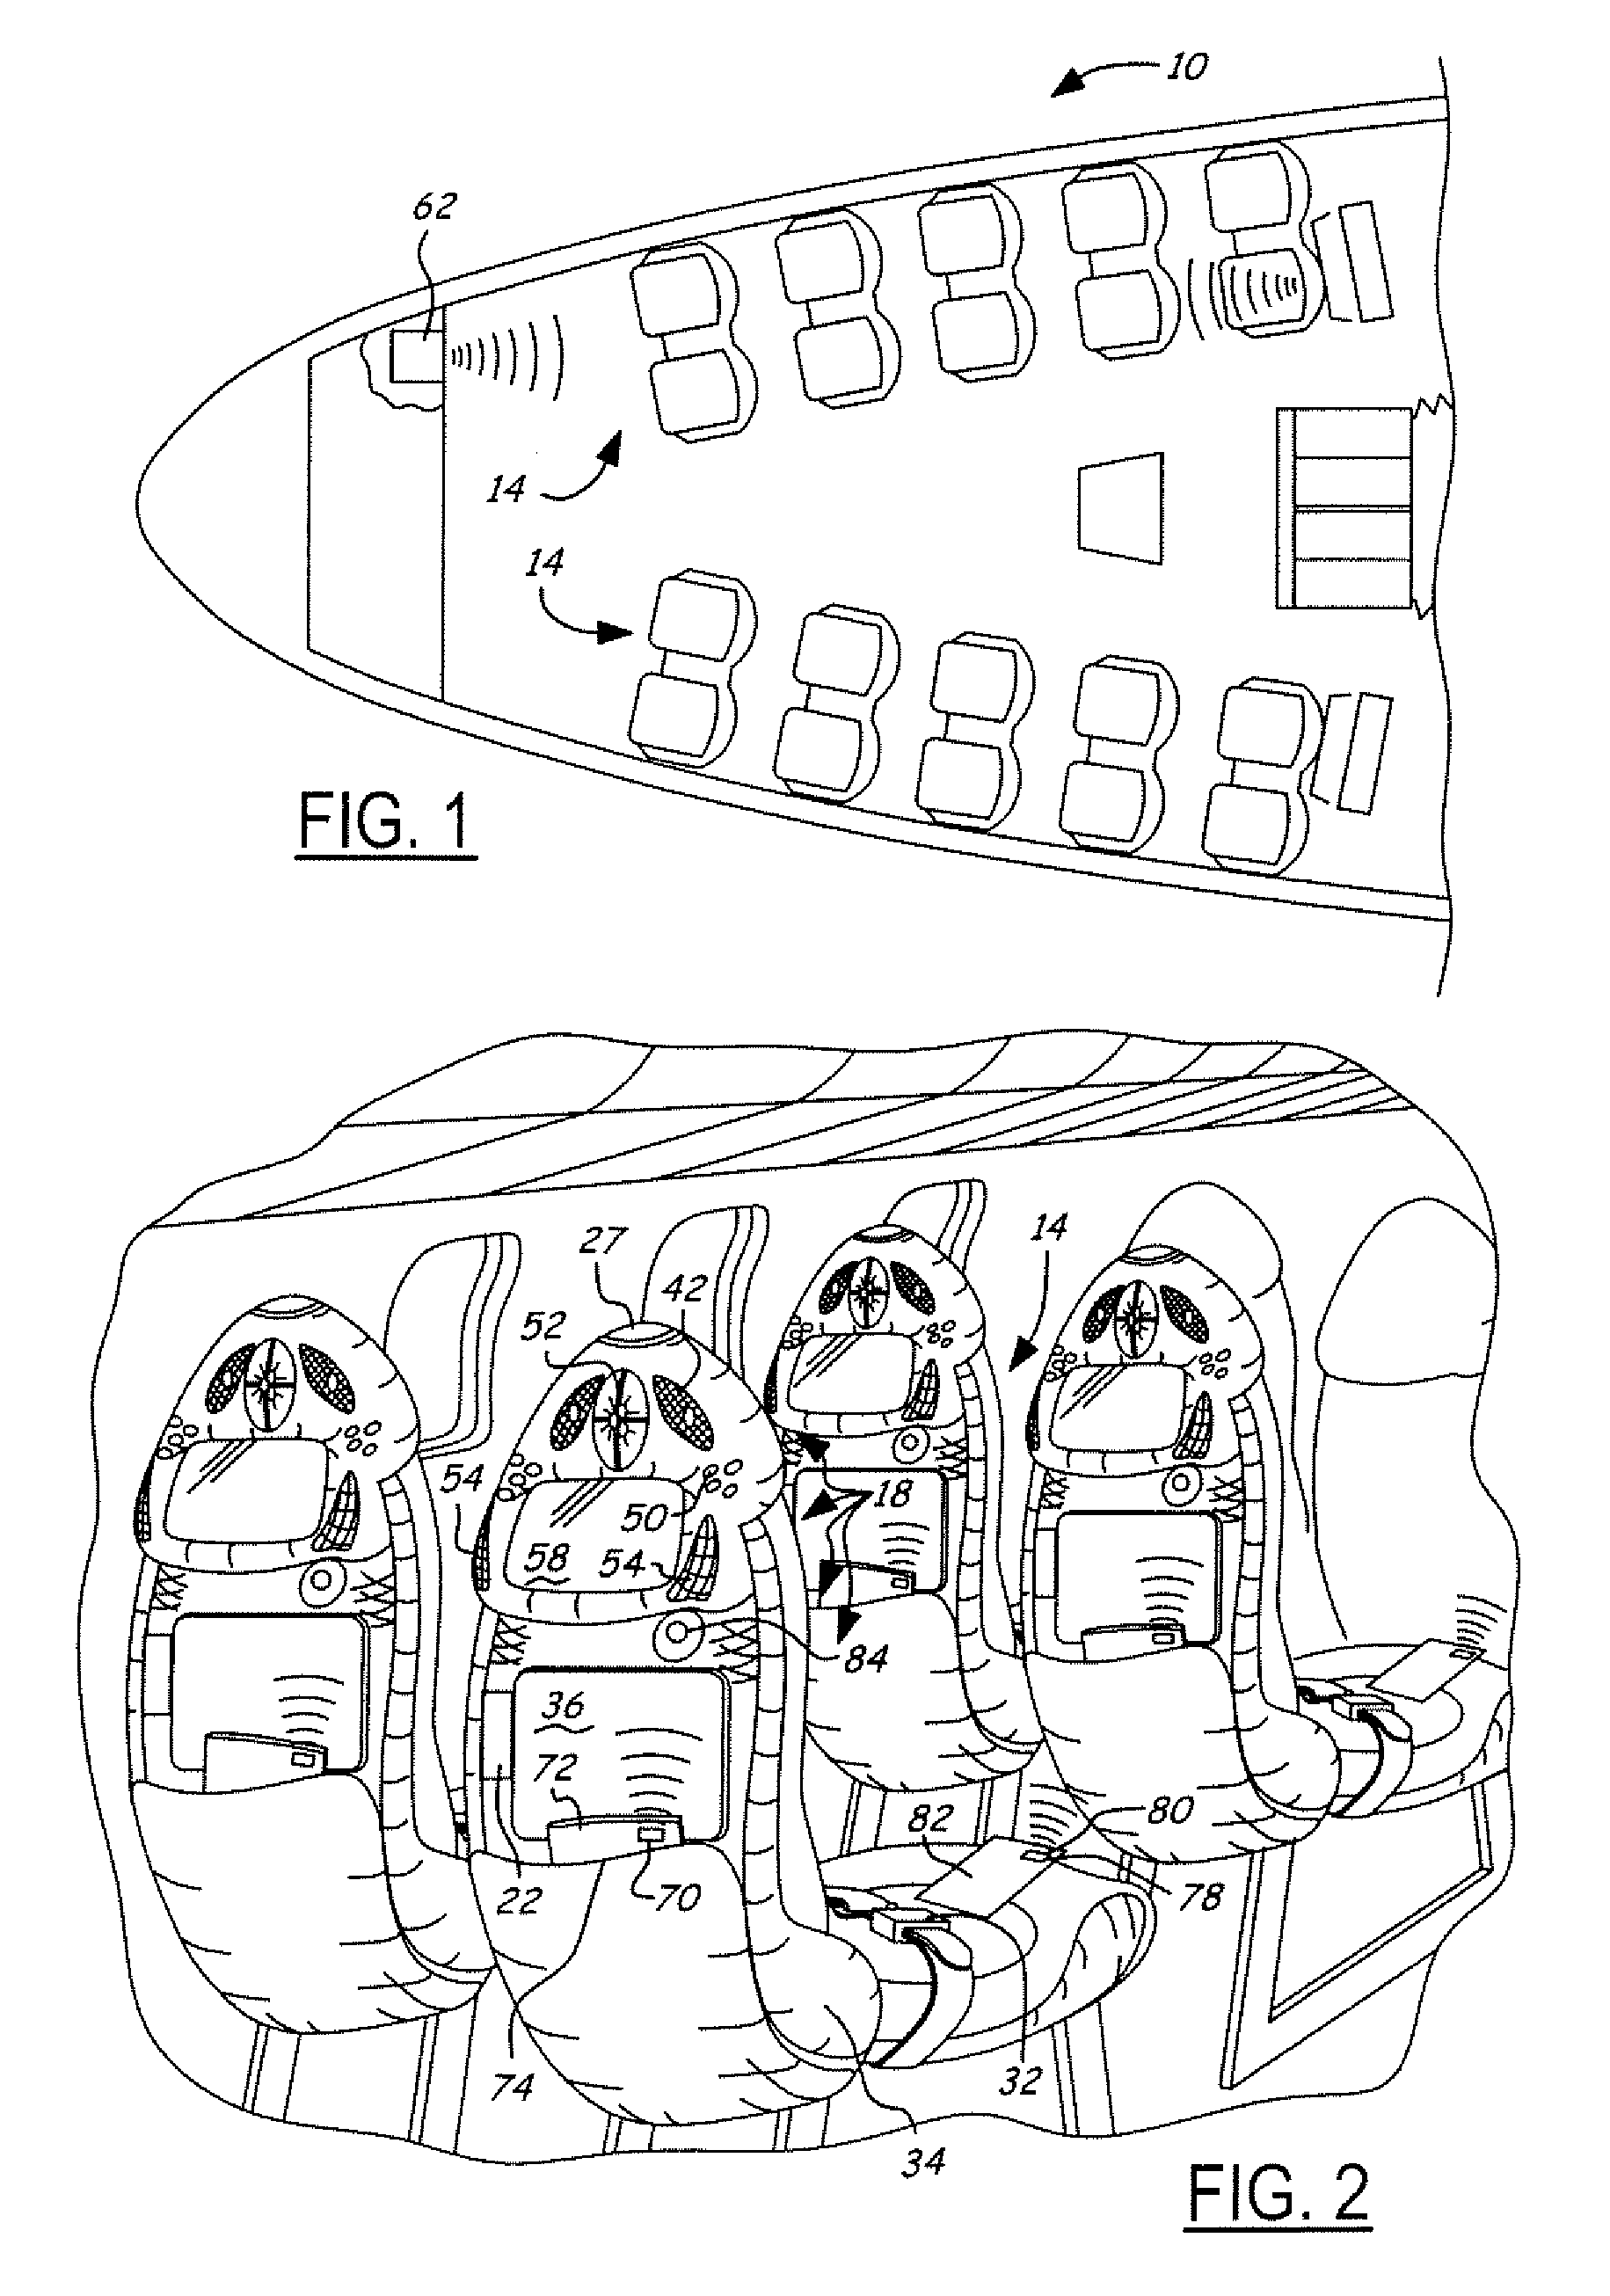 Modularized integrated aircraft seat structure